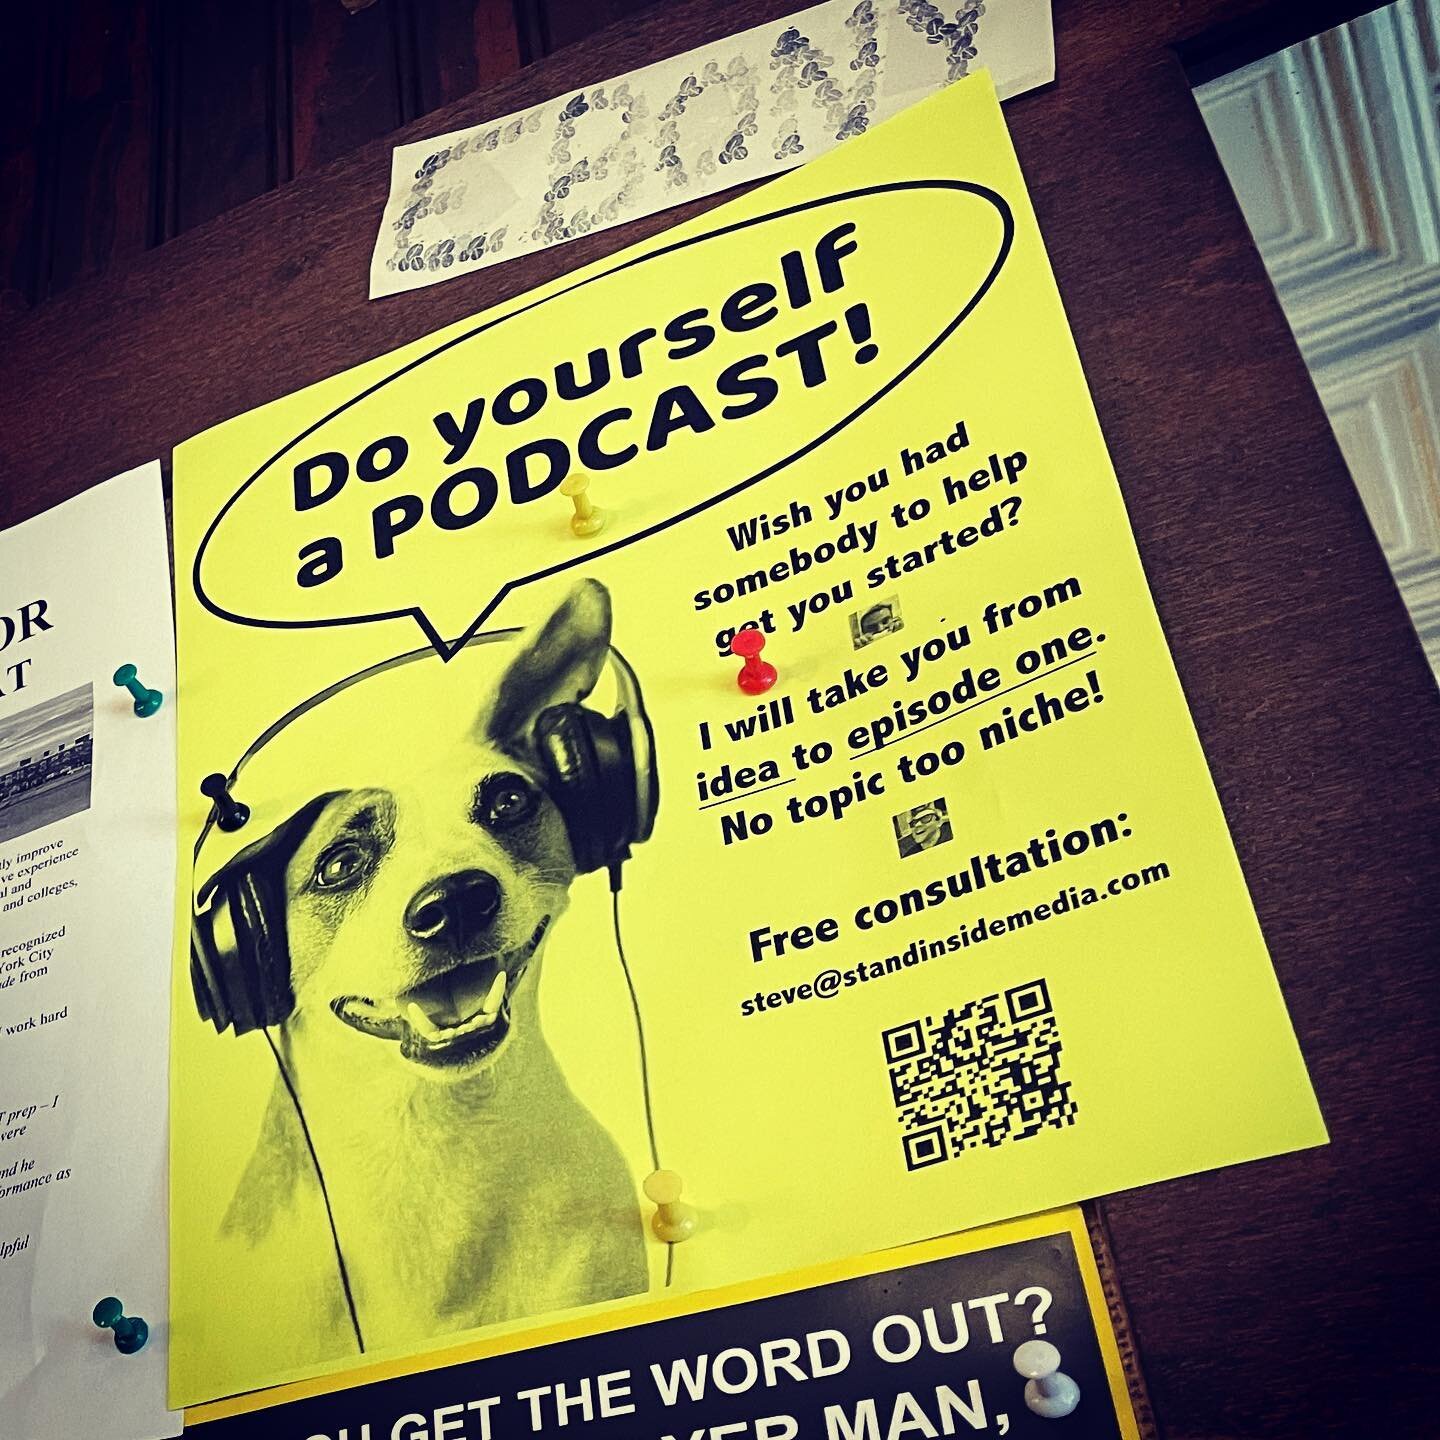 I want to make people&rsquo;s podcasting dreams come true! Already getting a lot of interest from these posters up in the East and West Village.  #podcasting #startapodcast #eastvillage #westvillage #nicheaesthetic #podcastersofinstagram #podcastlife